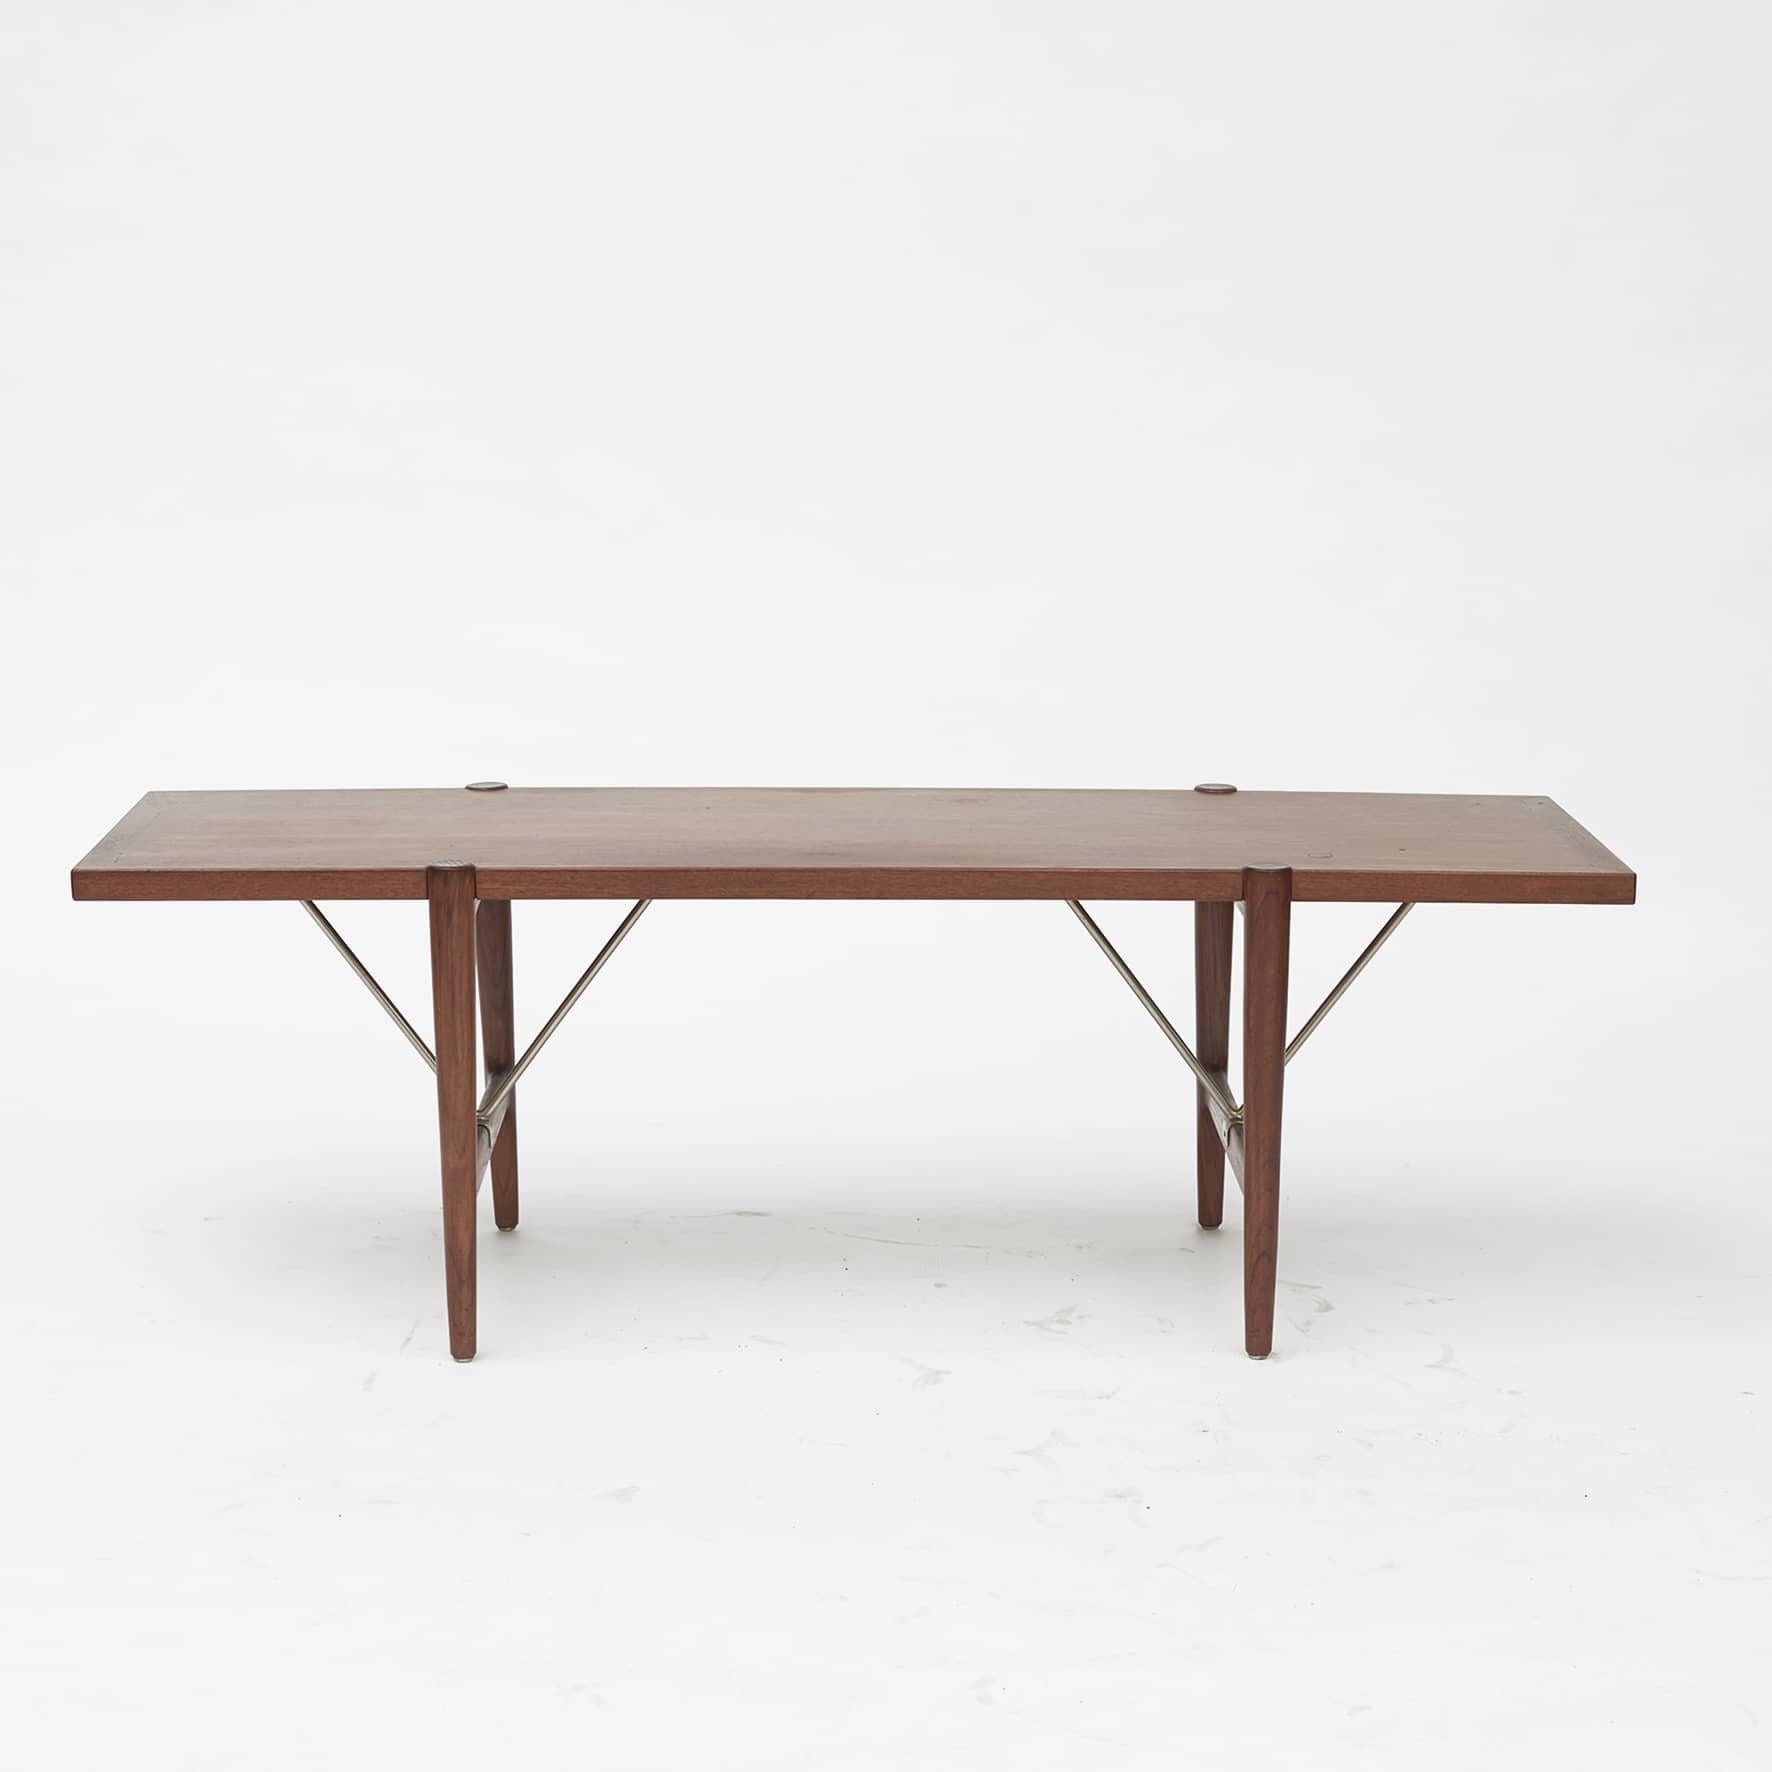 Kurt Østervig 1912-1986.
Teak coffee table with chrome-plated brass stretchers.
Designed and manufactured 1960-1965.